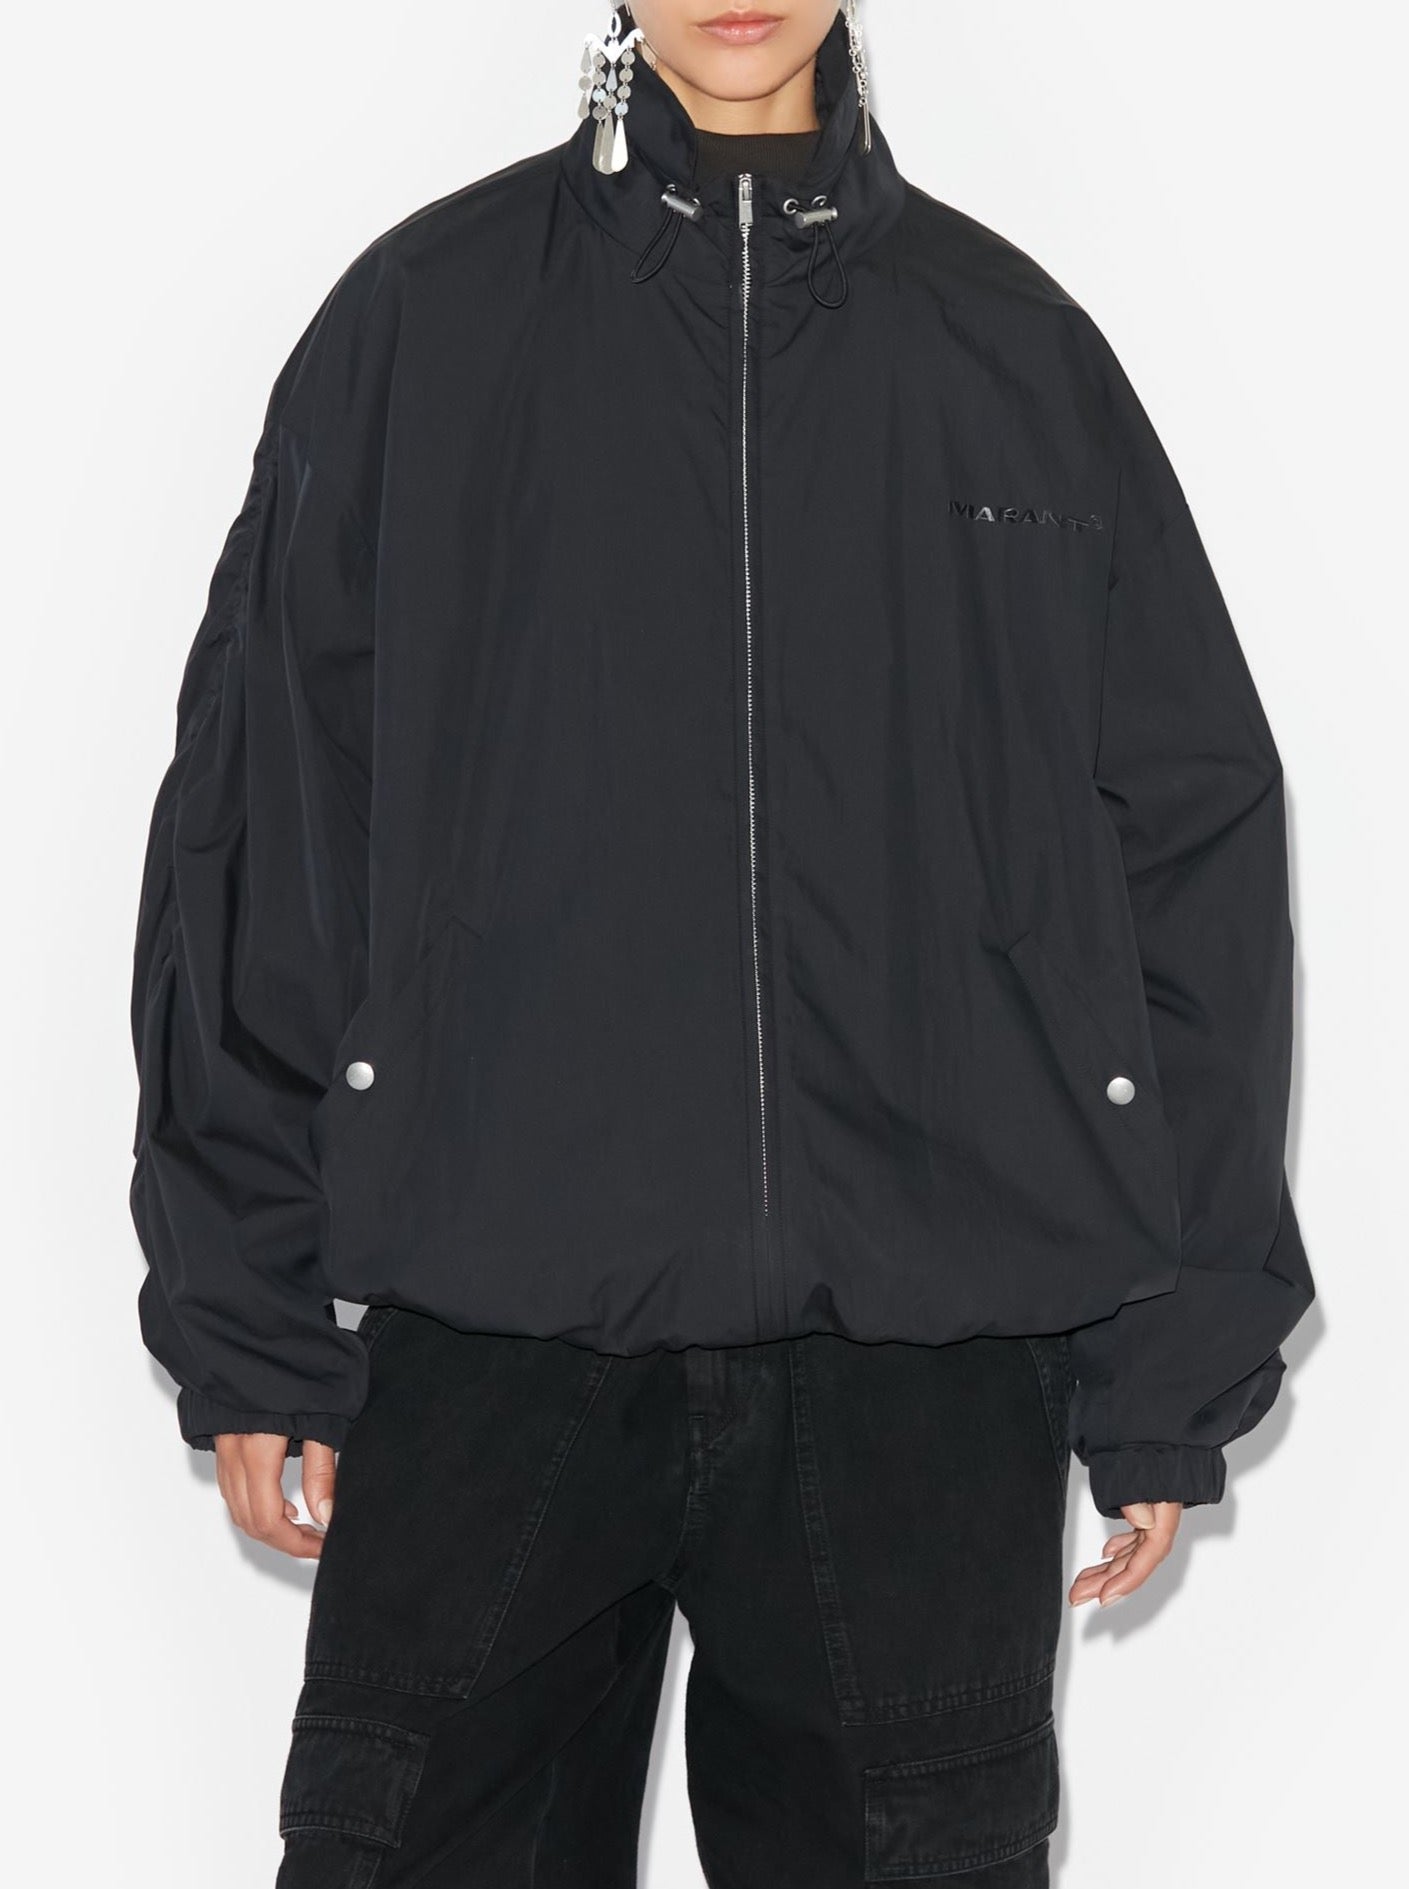 BUSTER jacket, faded black